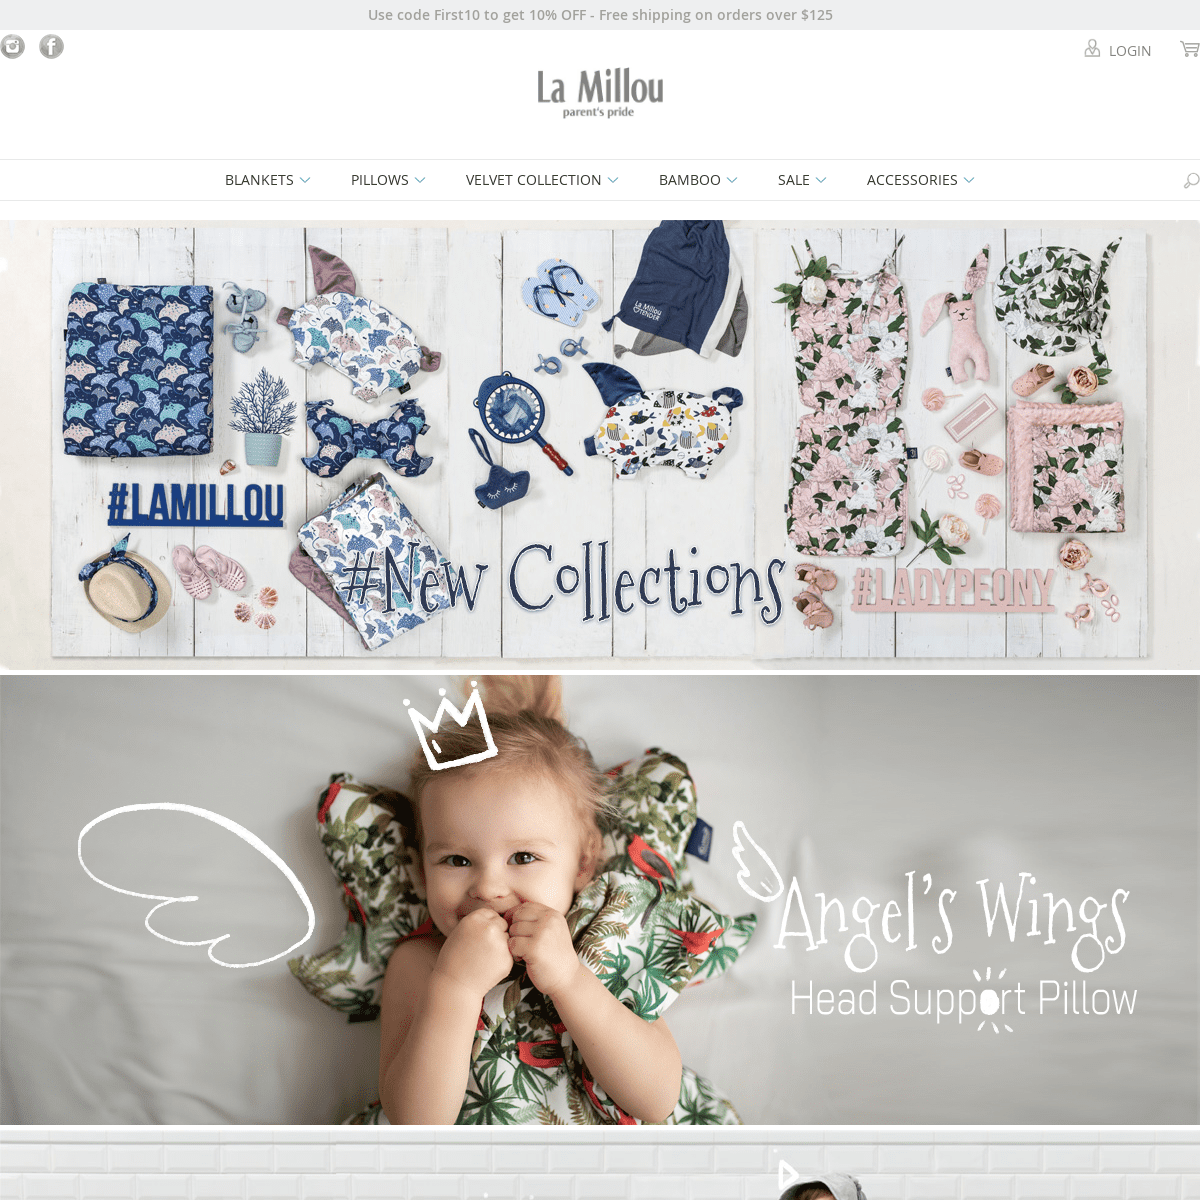 La Millou USA - European design & manufacture of bedding, toys and accessories for babies and children.